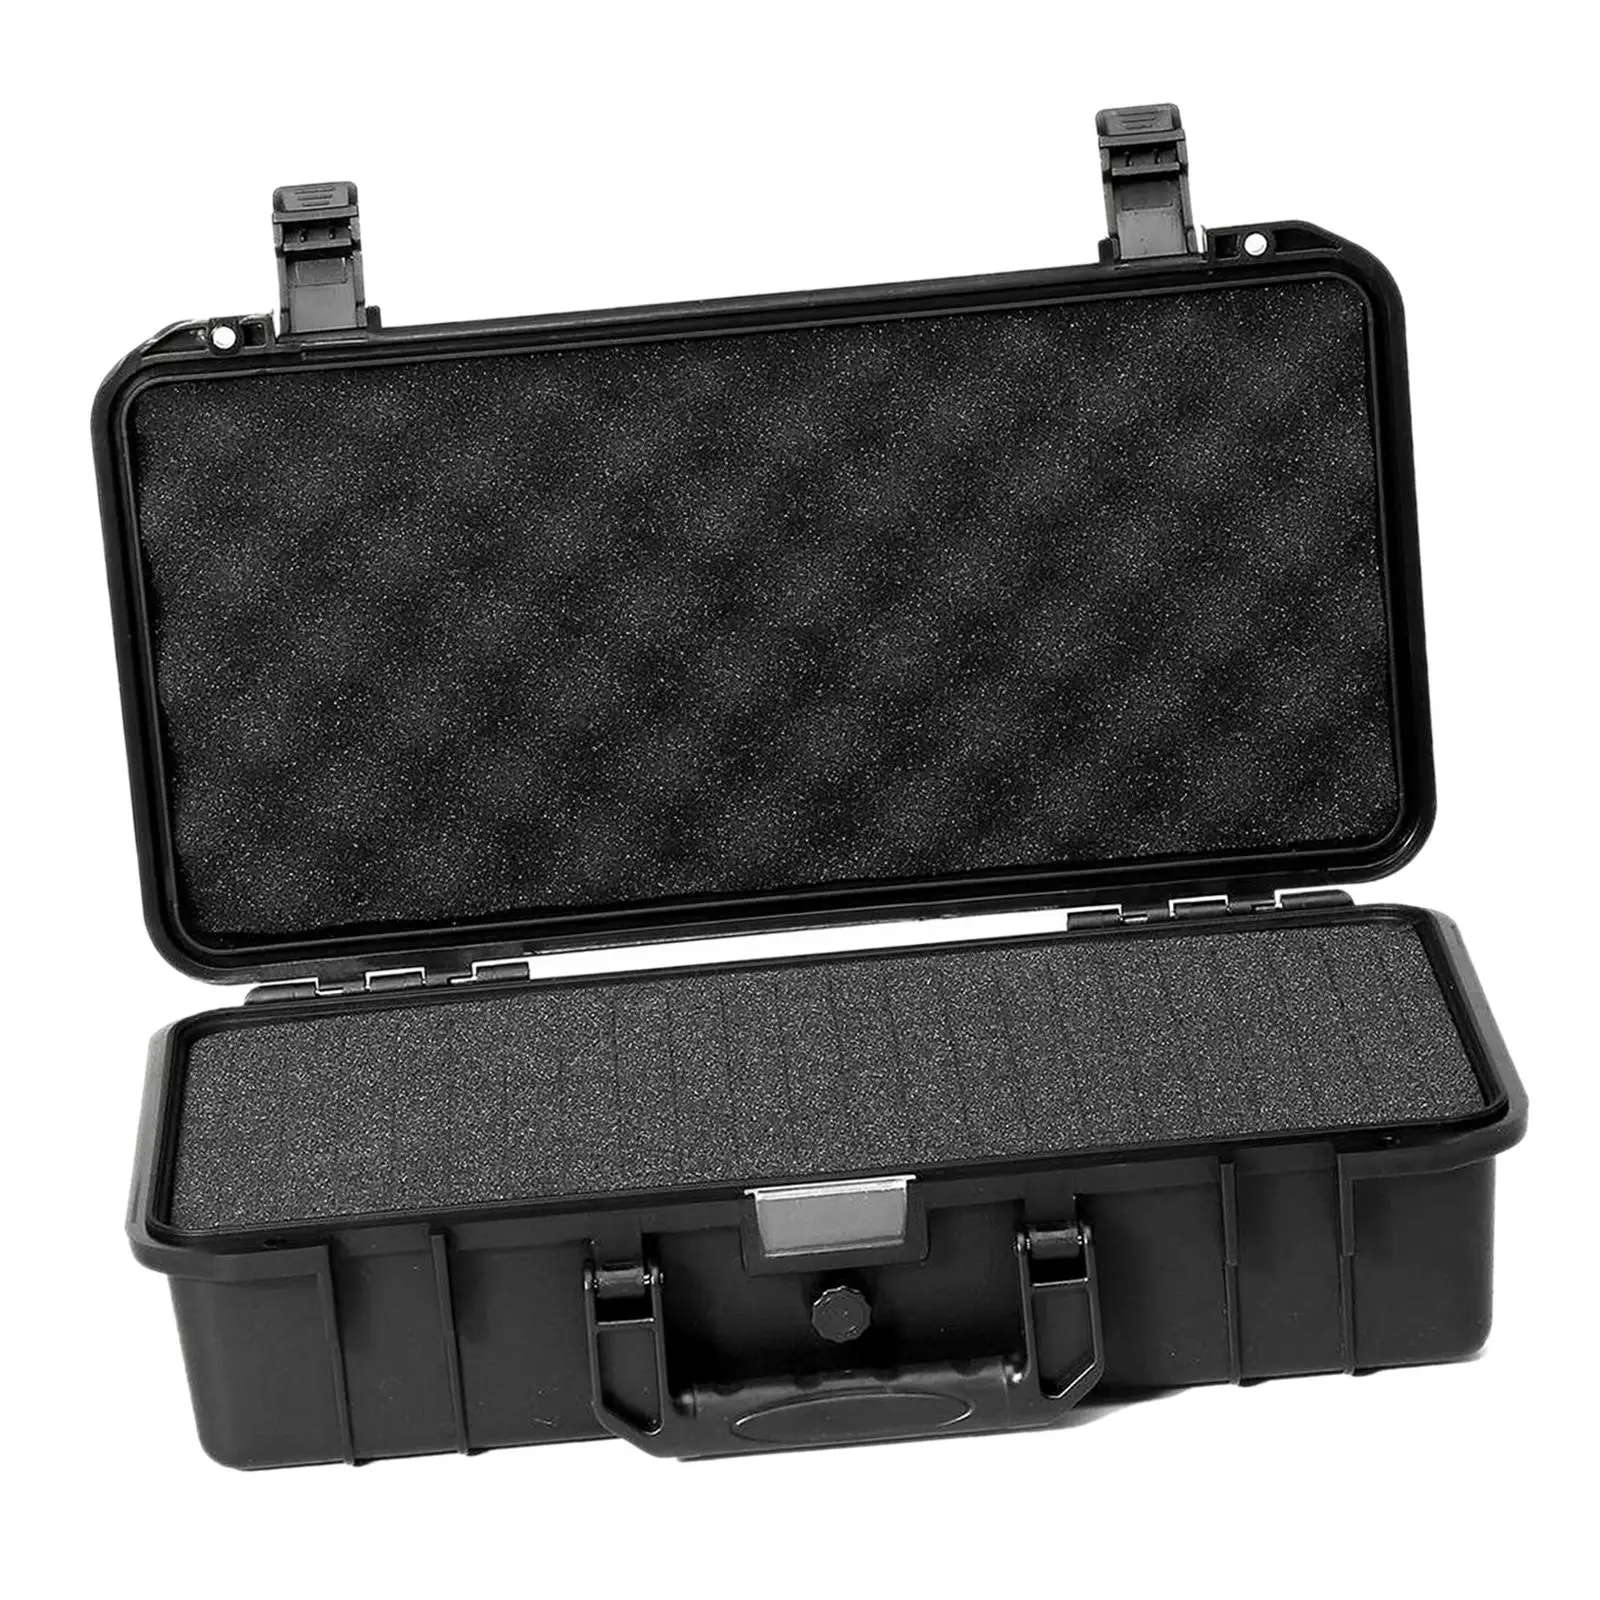 Portable Protective Toolbox Wear-Resistant Lockable Plastic with Sponge Sealed Shockproof Lightweight Storage Box for Hone